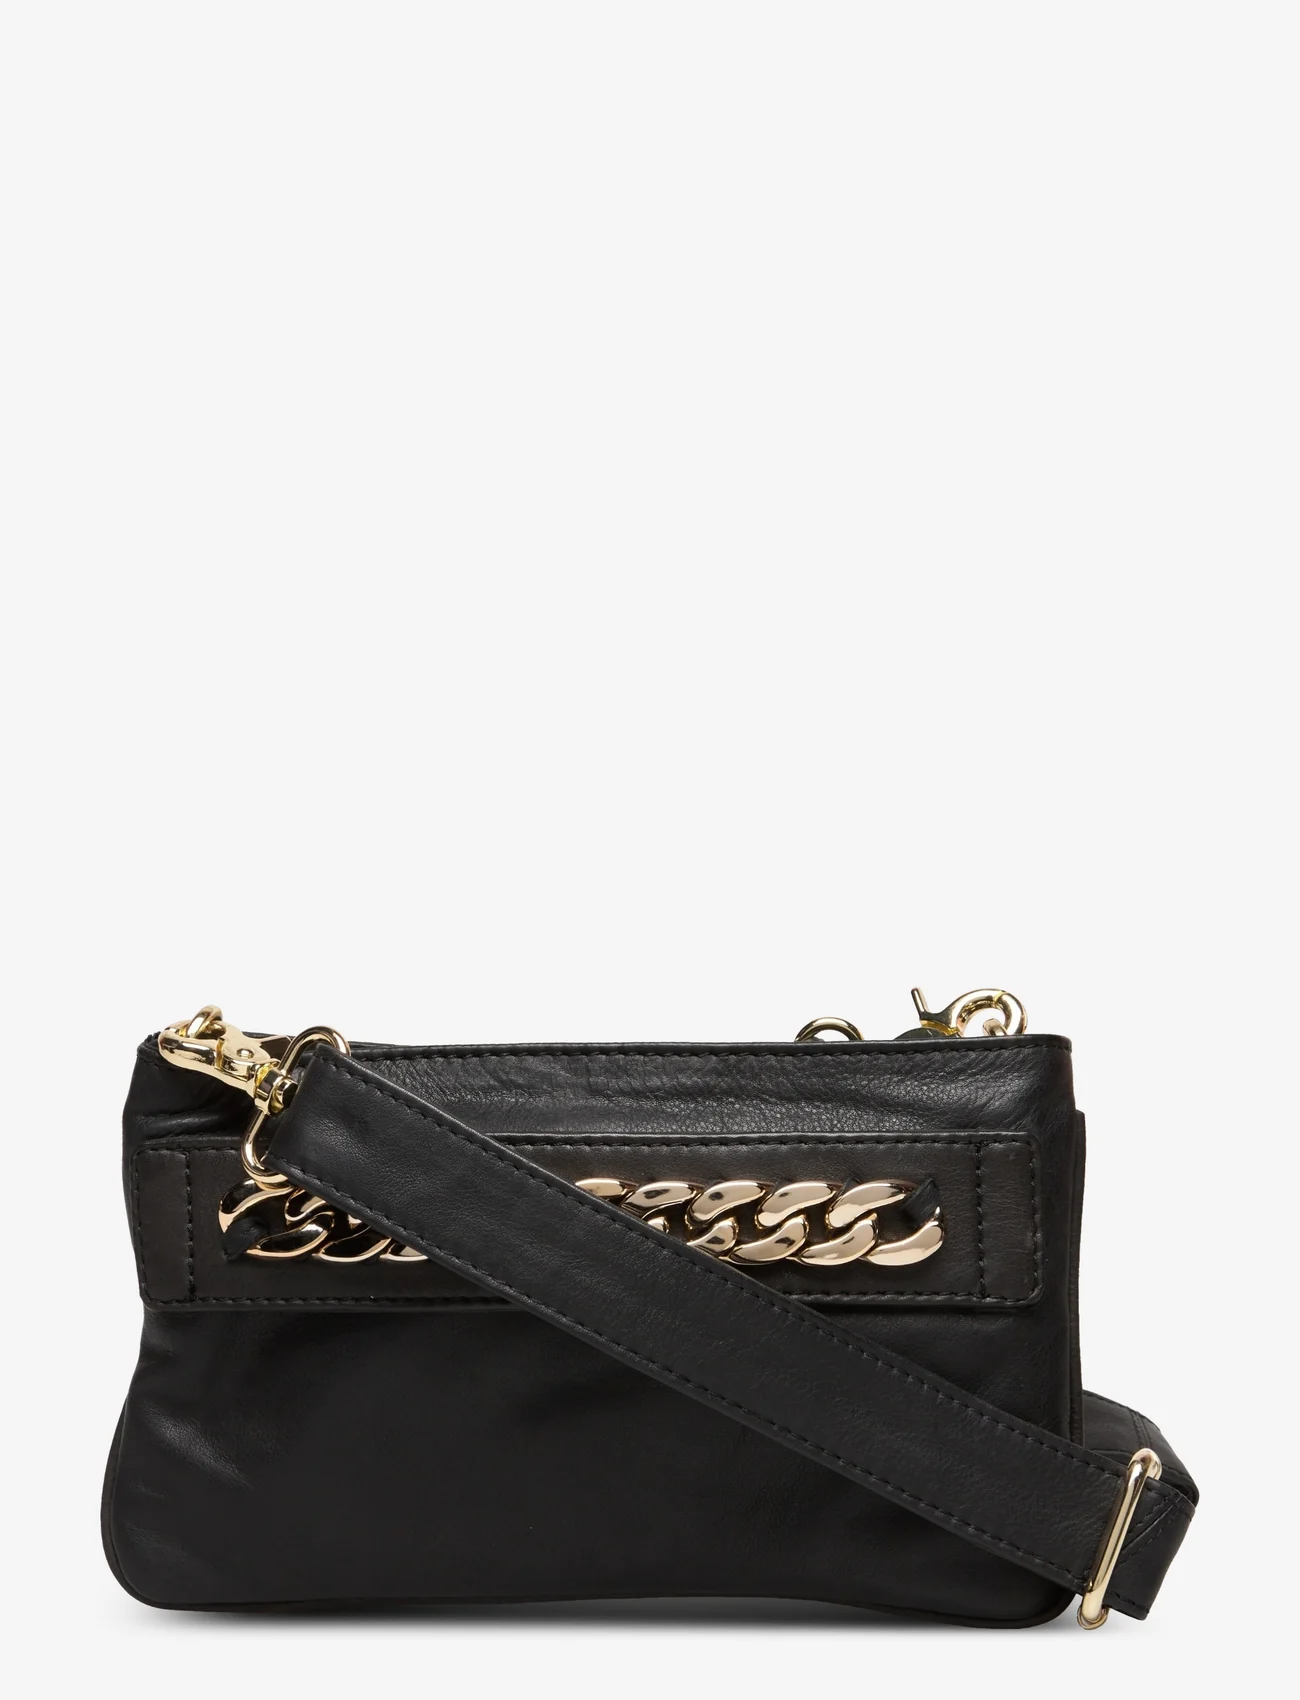 DEPECHE - Small bag / Clutch - peoriided outlet-hindadega - black - 0